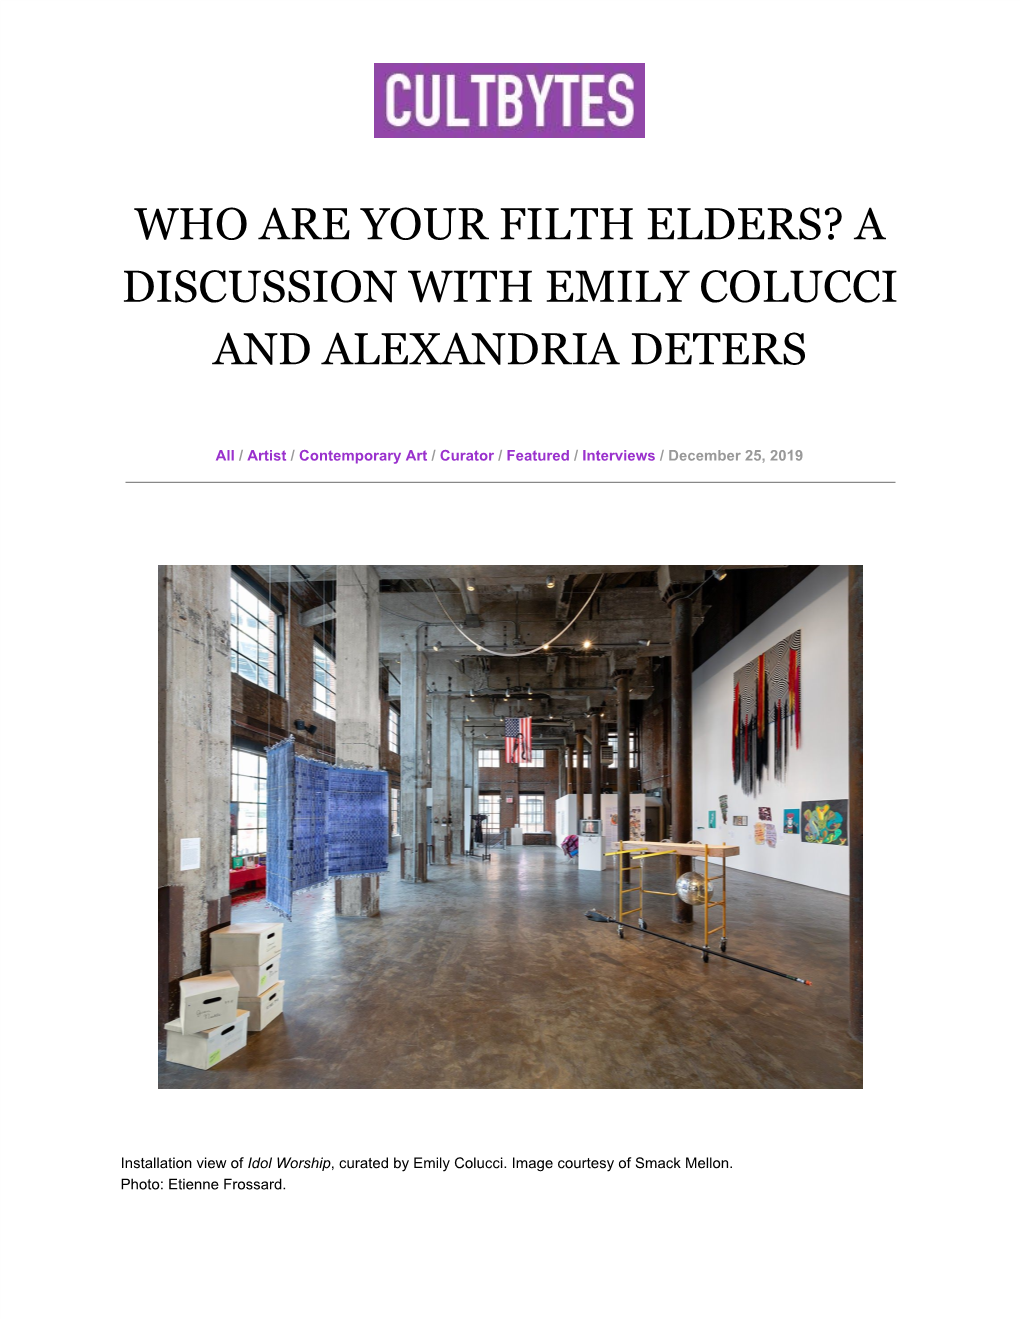 Who Are Your Filth Elders? a Discussion with Emily Colucci and Alexandria Deters